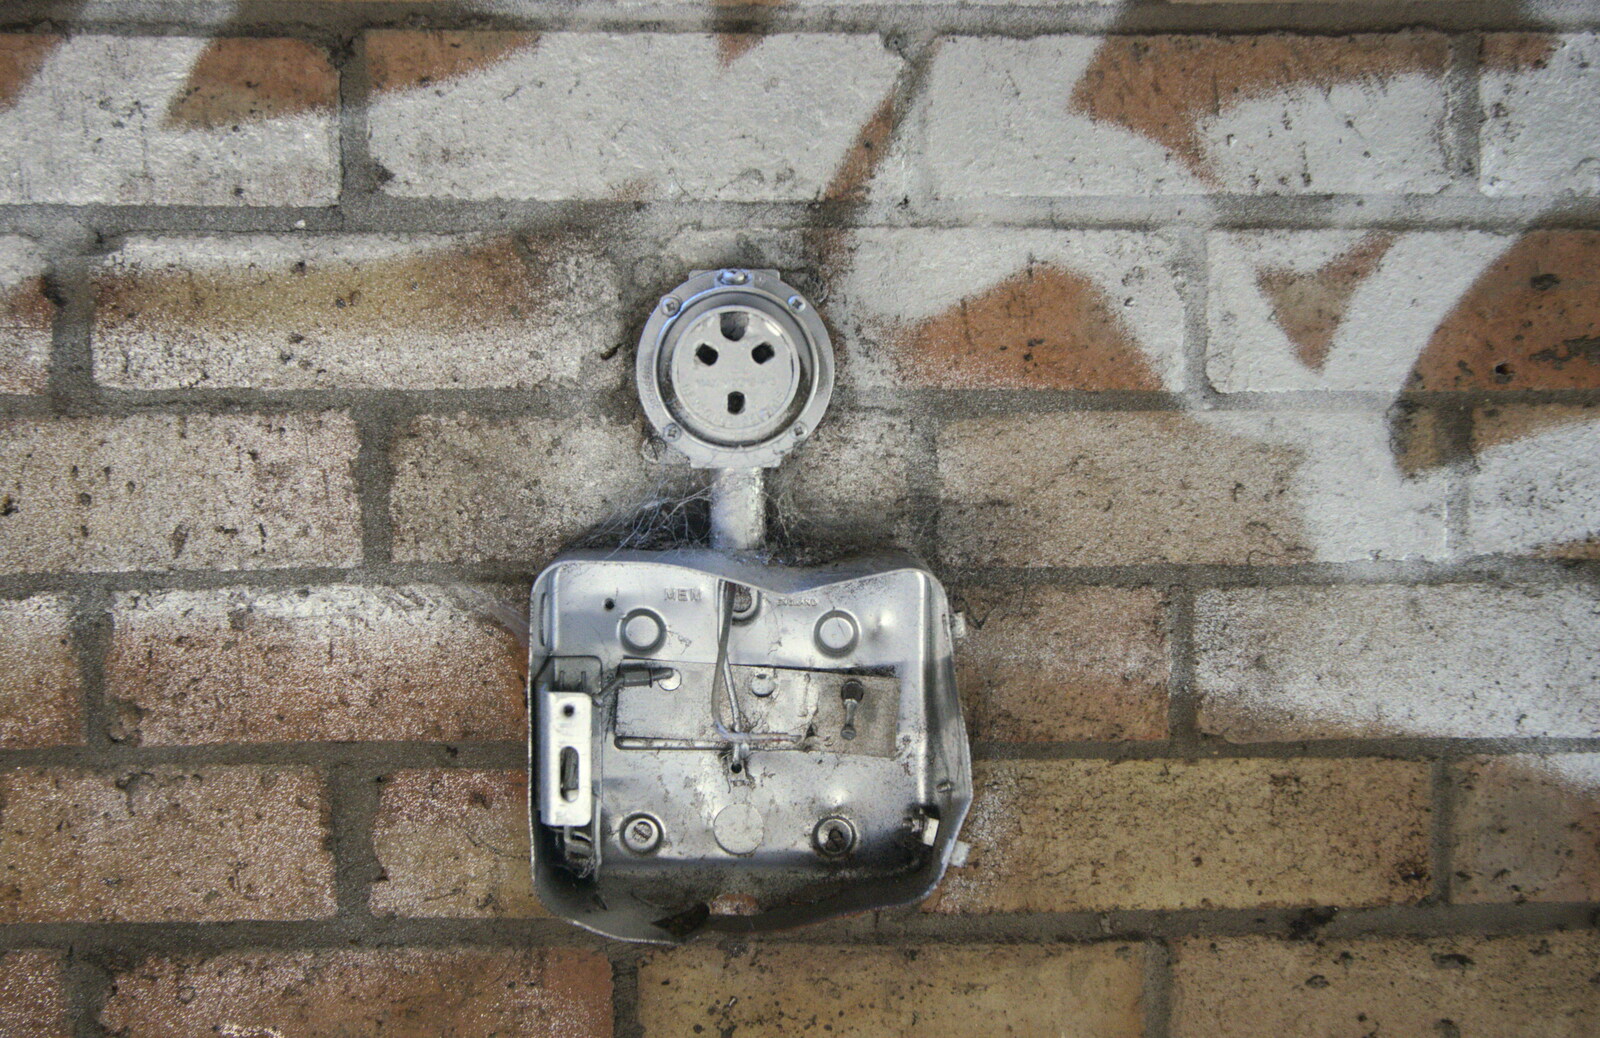 Broken electrical fitting from Rural Norfolk Dereliction and Graffiti, Ipswich Road, Norwich - 27th May 2012